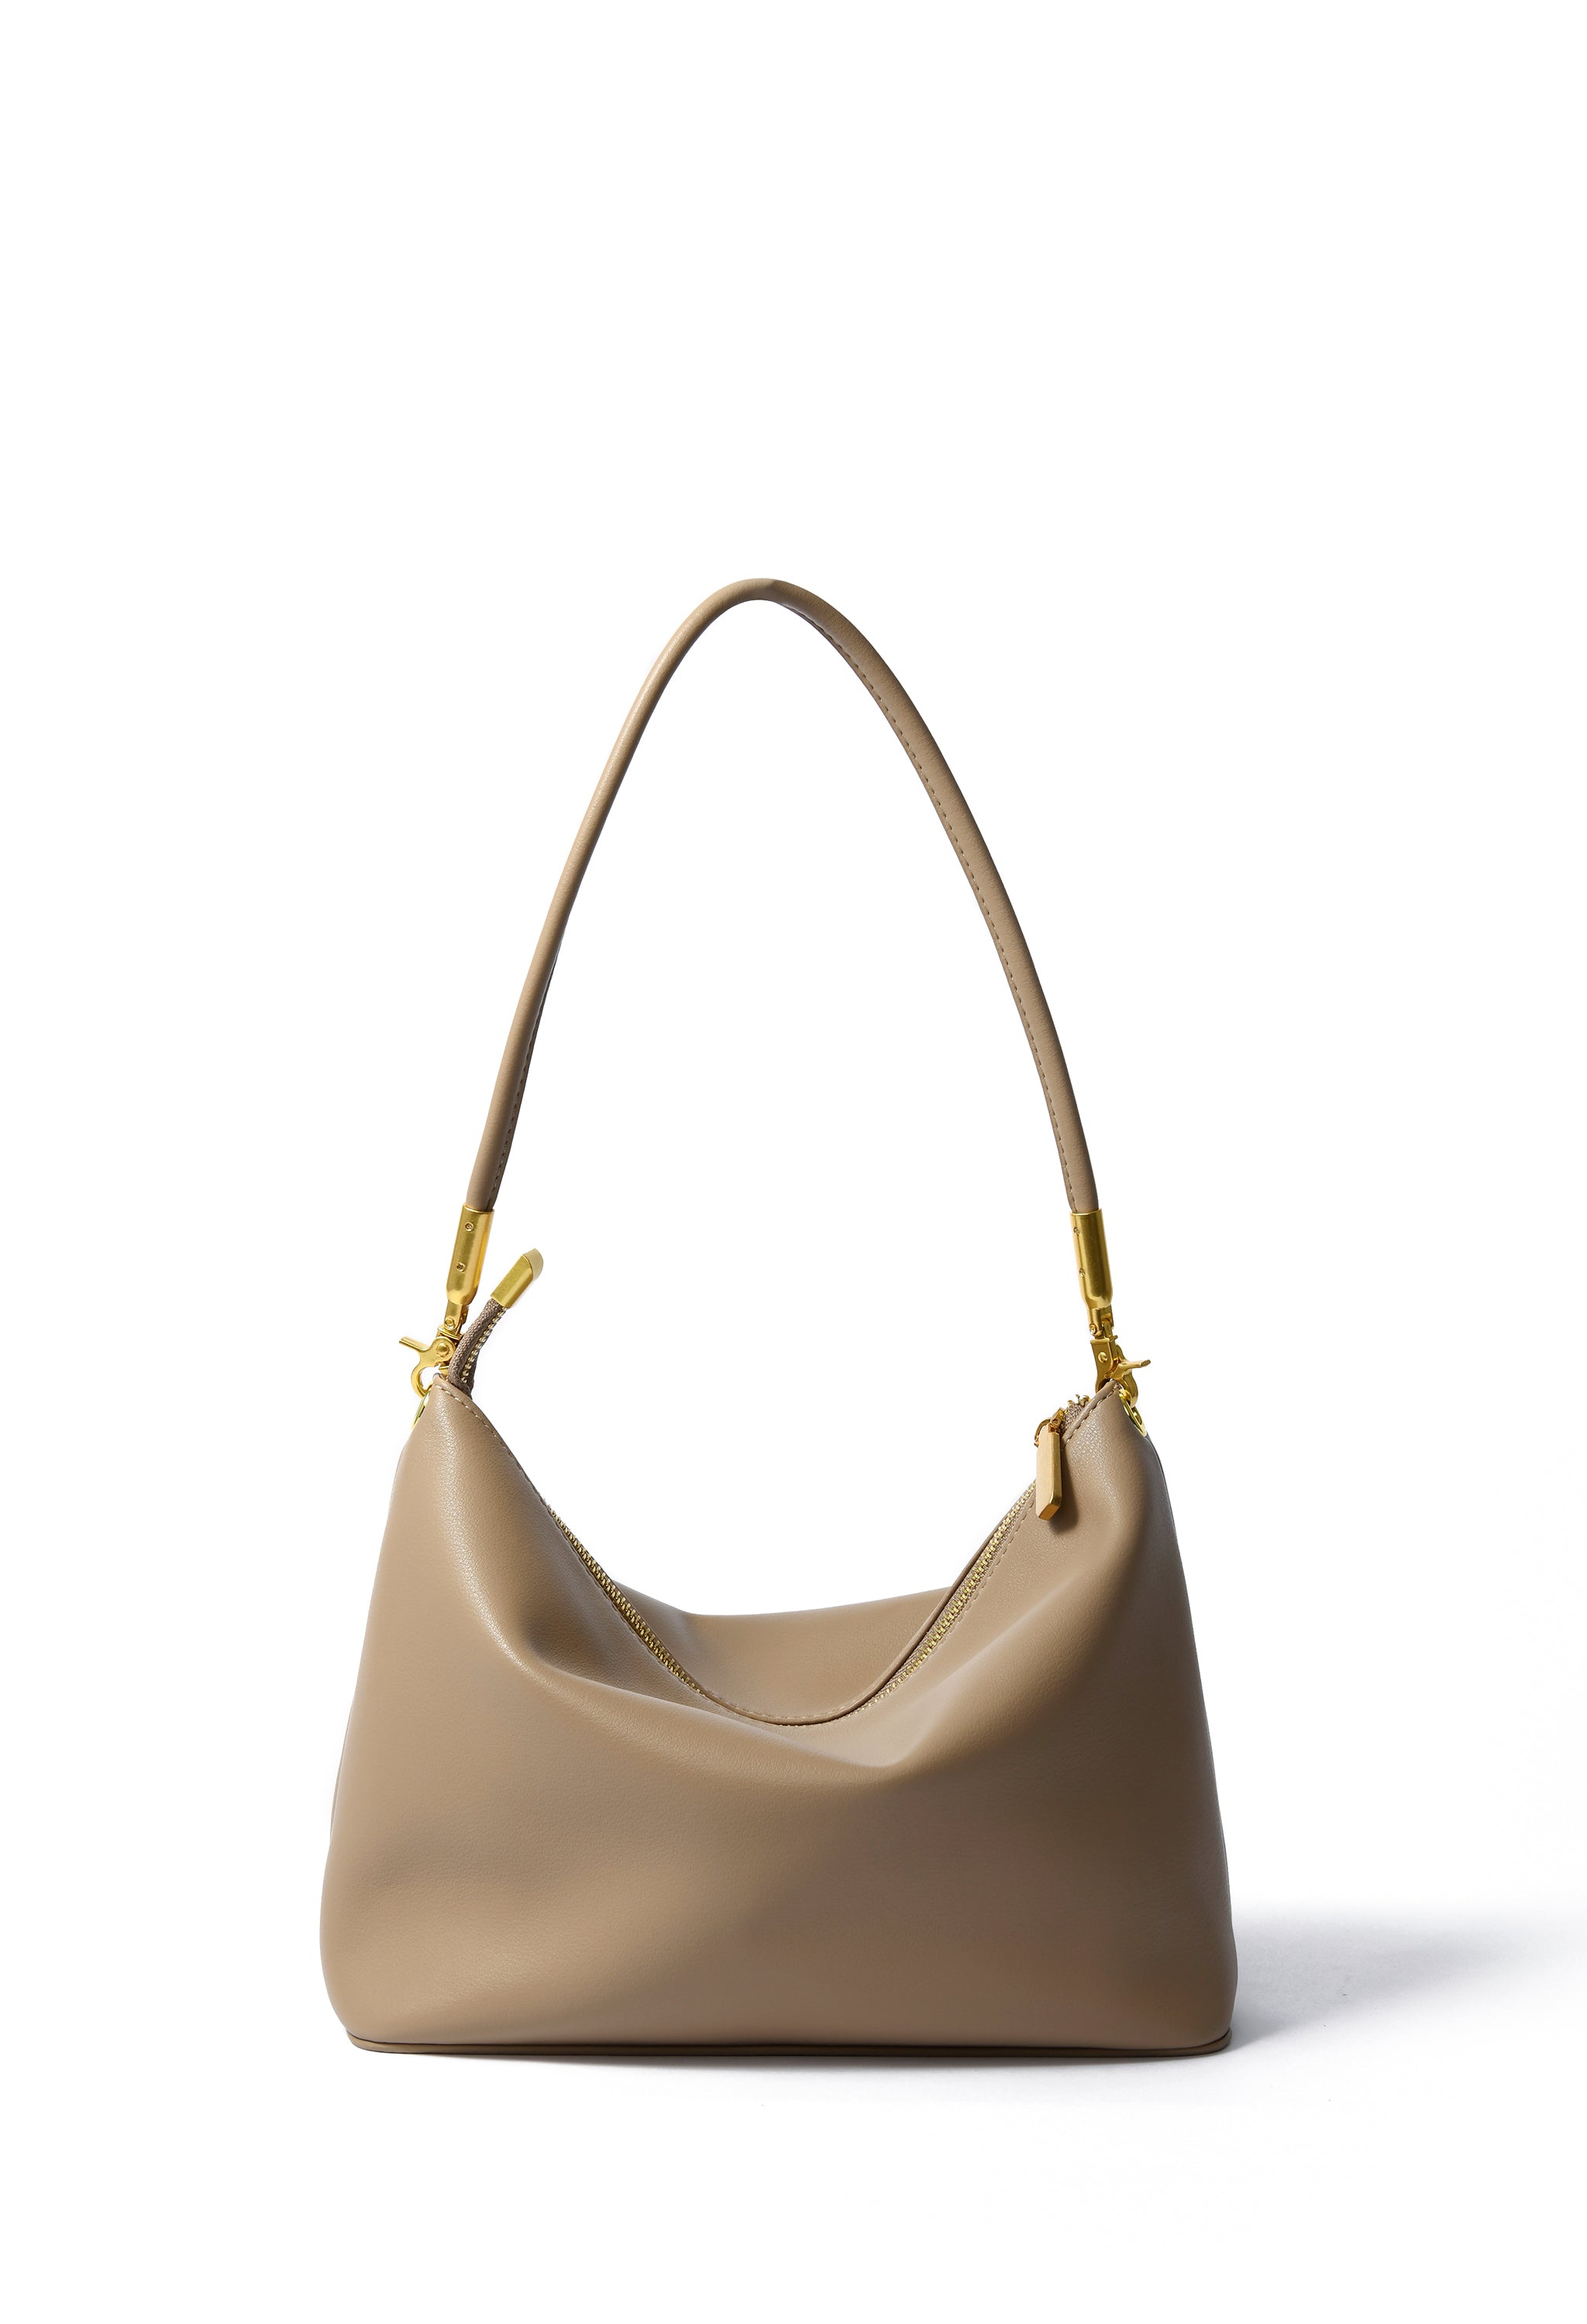 Aubrey Bag in smooth leather, Khaki BOB ORE blue collection on sale 2022